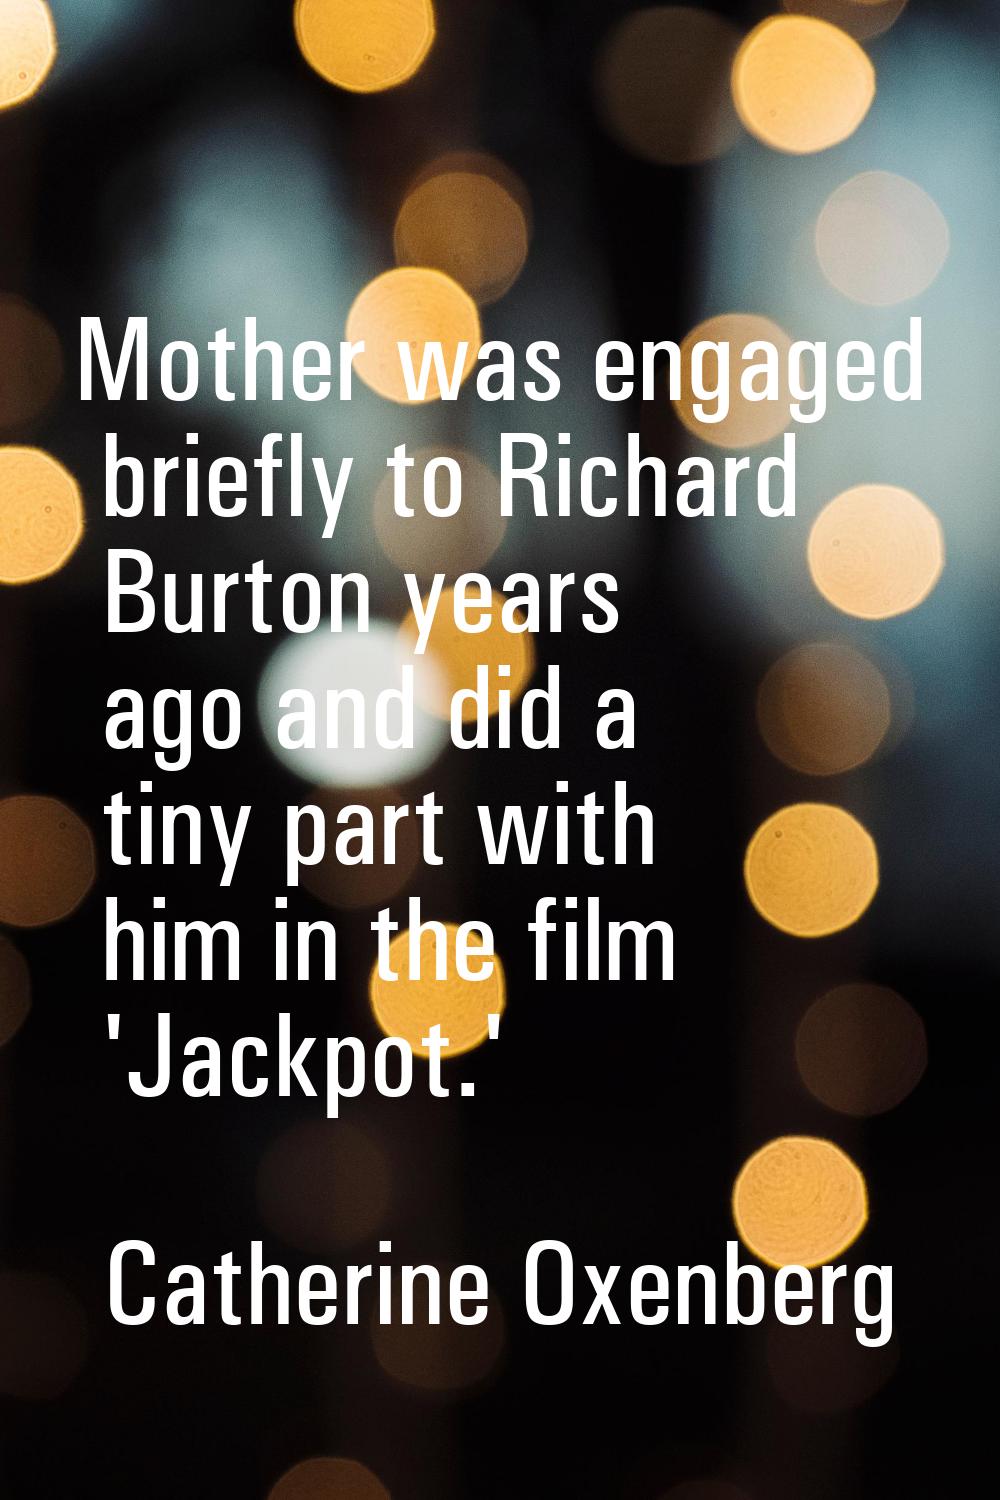 Mother was engaged briefly to Richard Burton years ago and did a tiny part with him in the film 'Ja